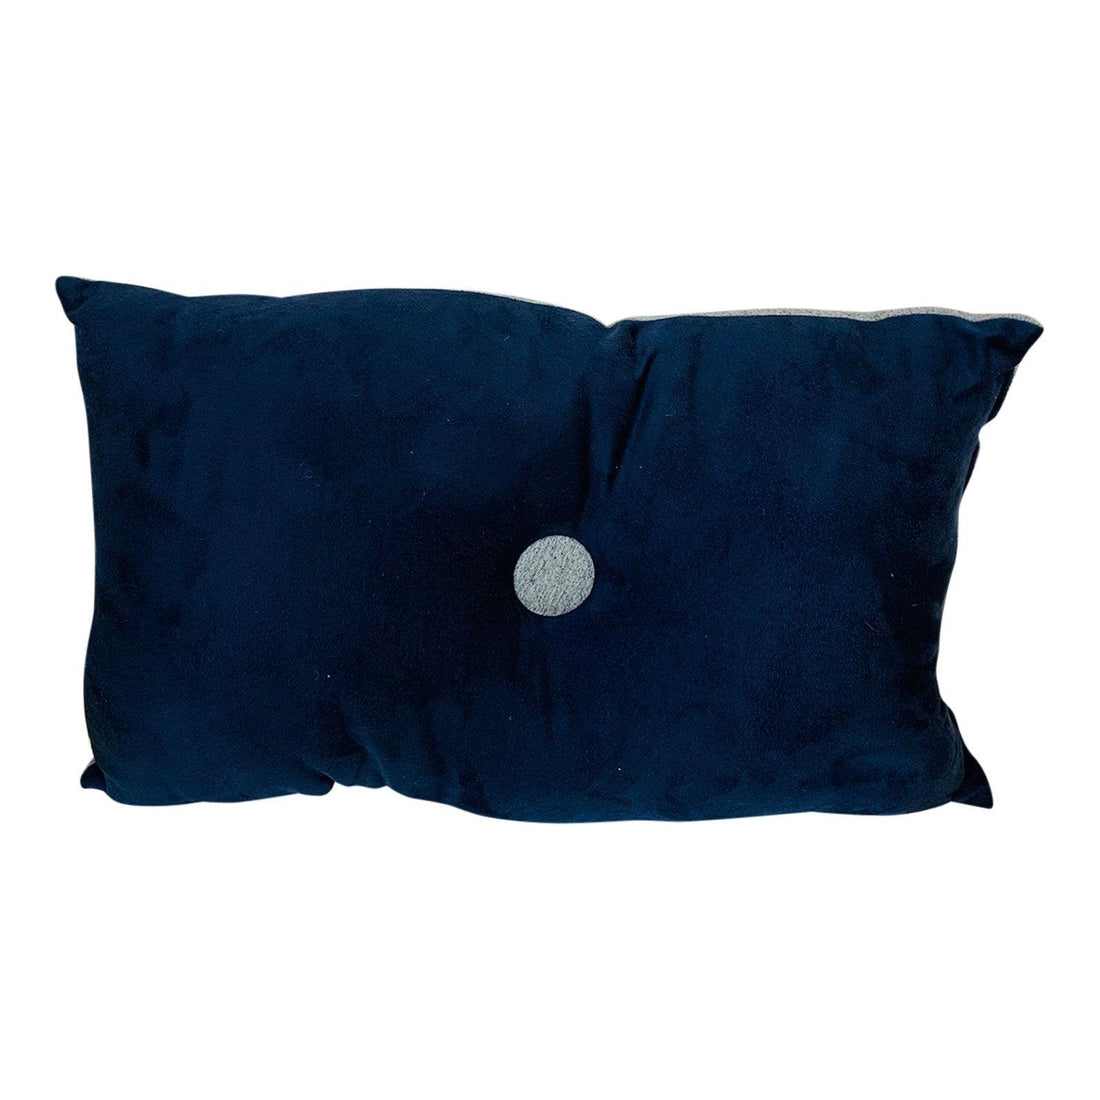 Double Side Rectangular Scatter Cushion Blue 45cm - £26.99 - Throw Pillows 